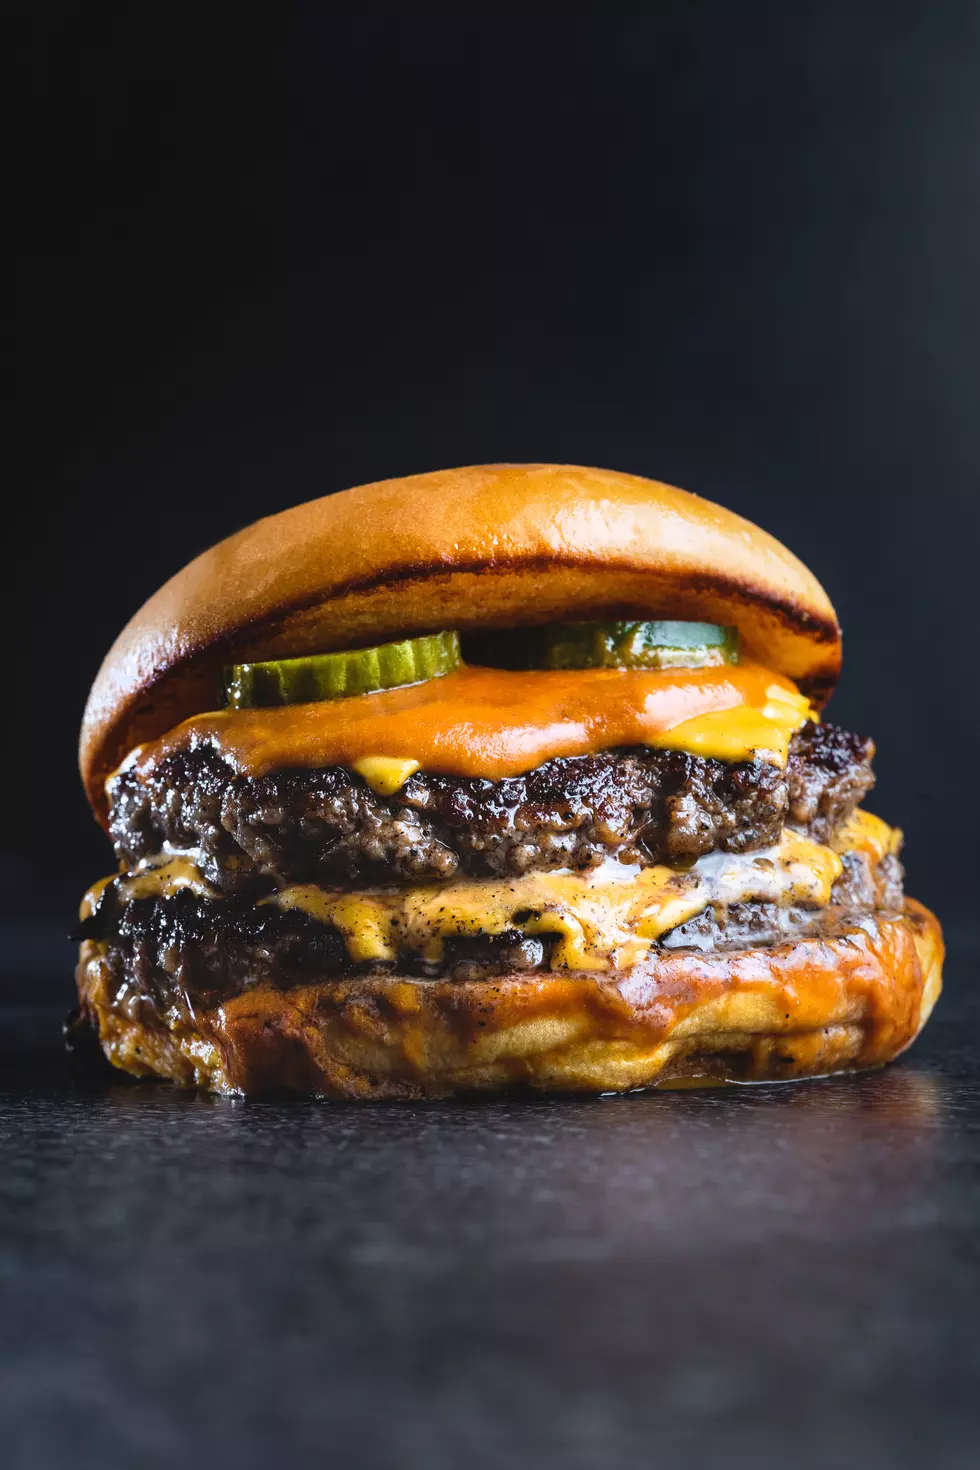 TripAdvisor&#8217;s Best Burgers In Montana. Do You See Your Favorite?